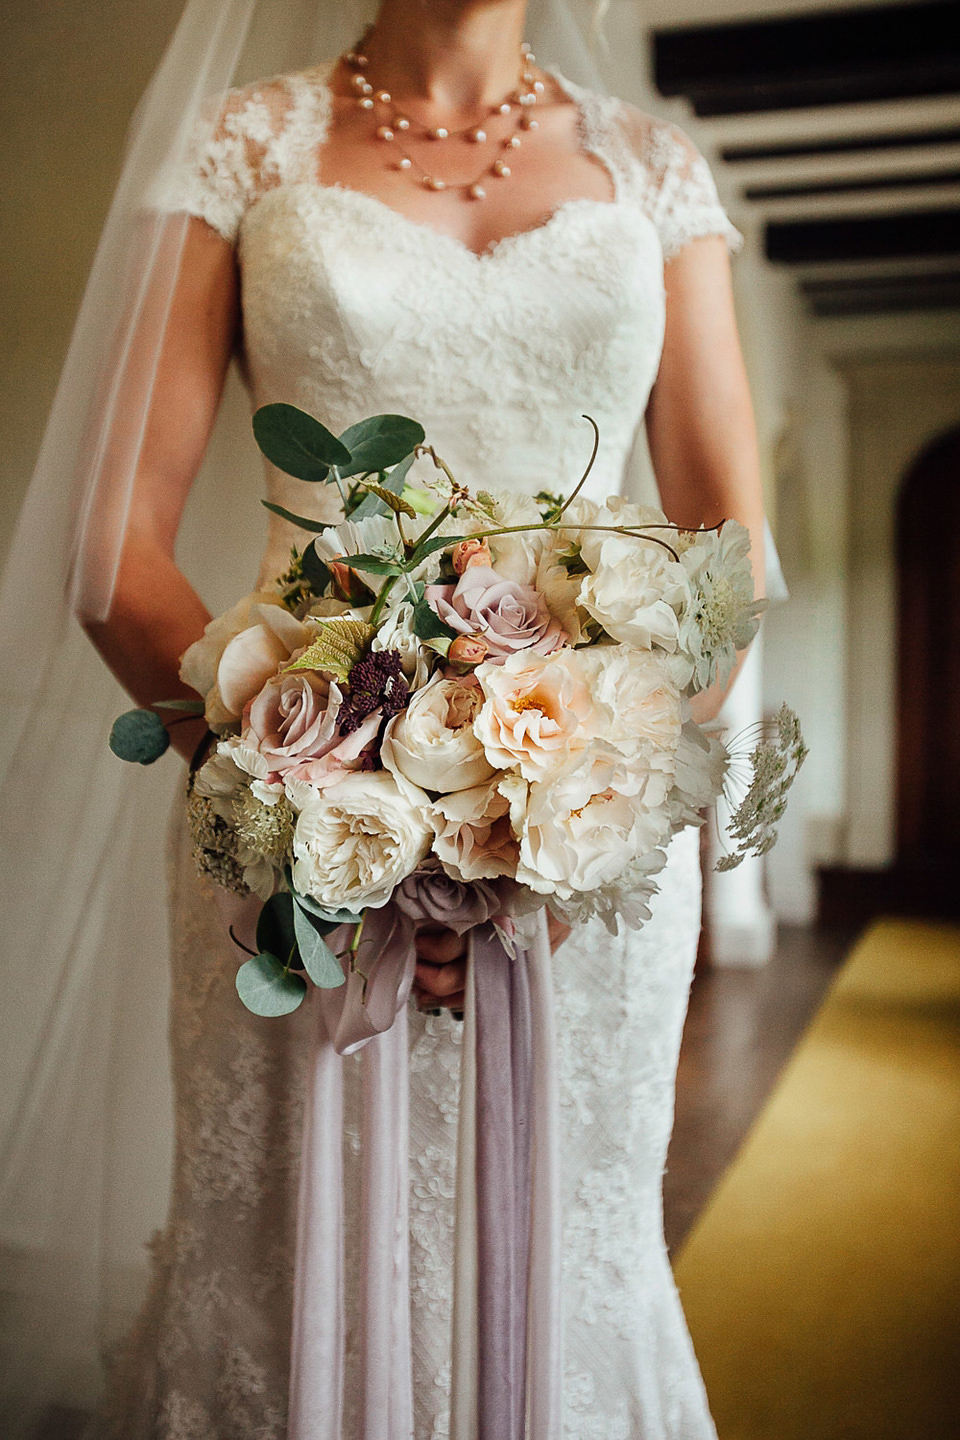 A Suzanne Neville gown for a relaxed and elegant garden wedding. Styled by Blue Fizz events.